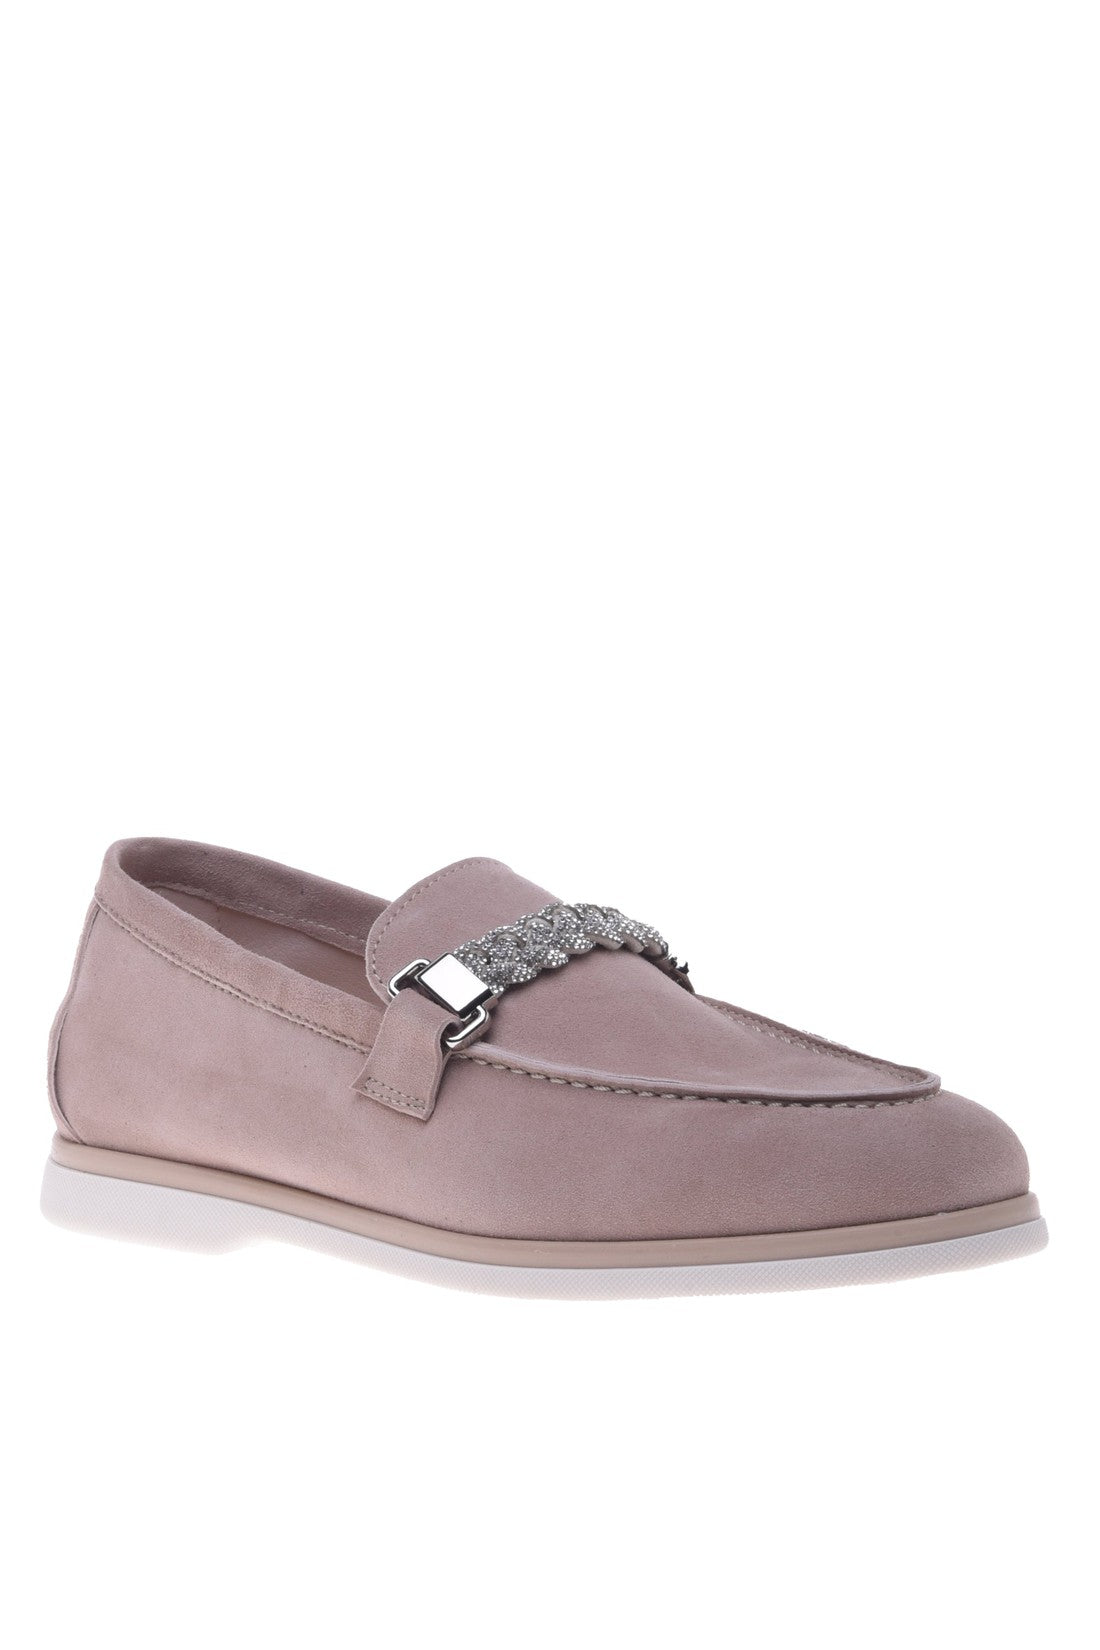 Nude suede loafers